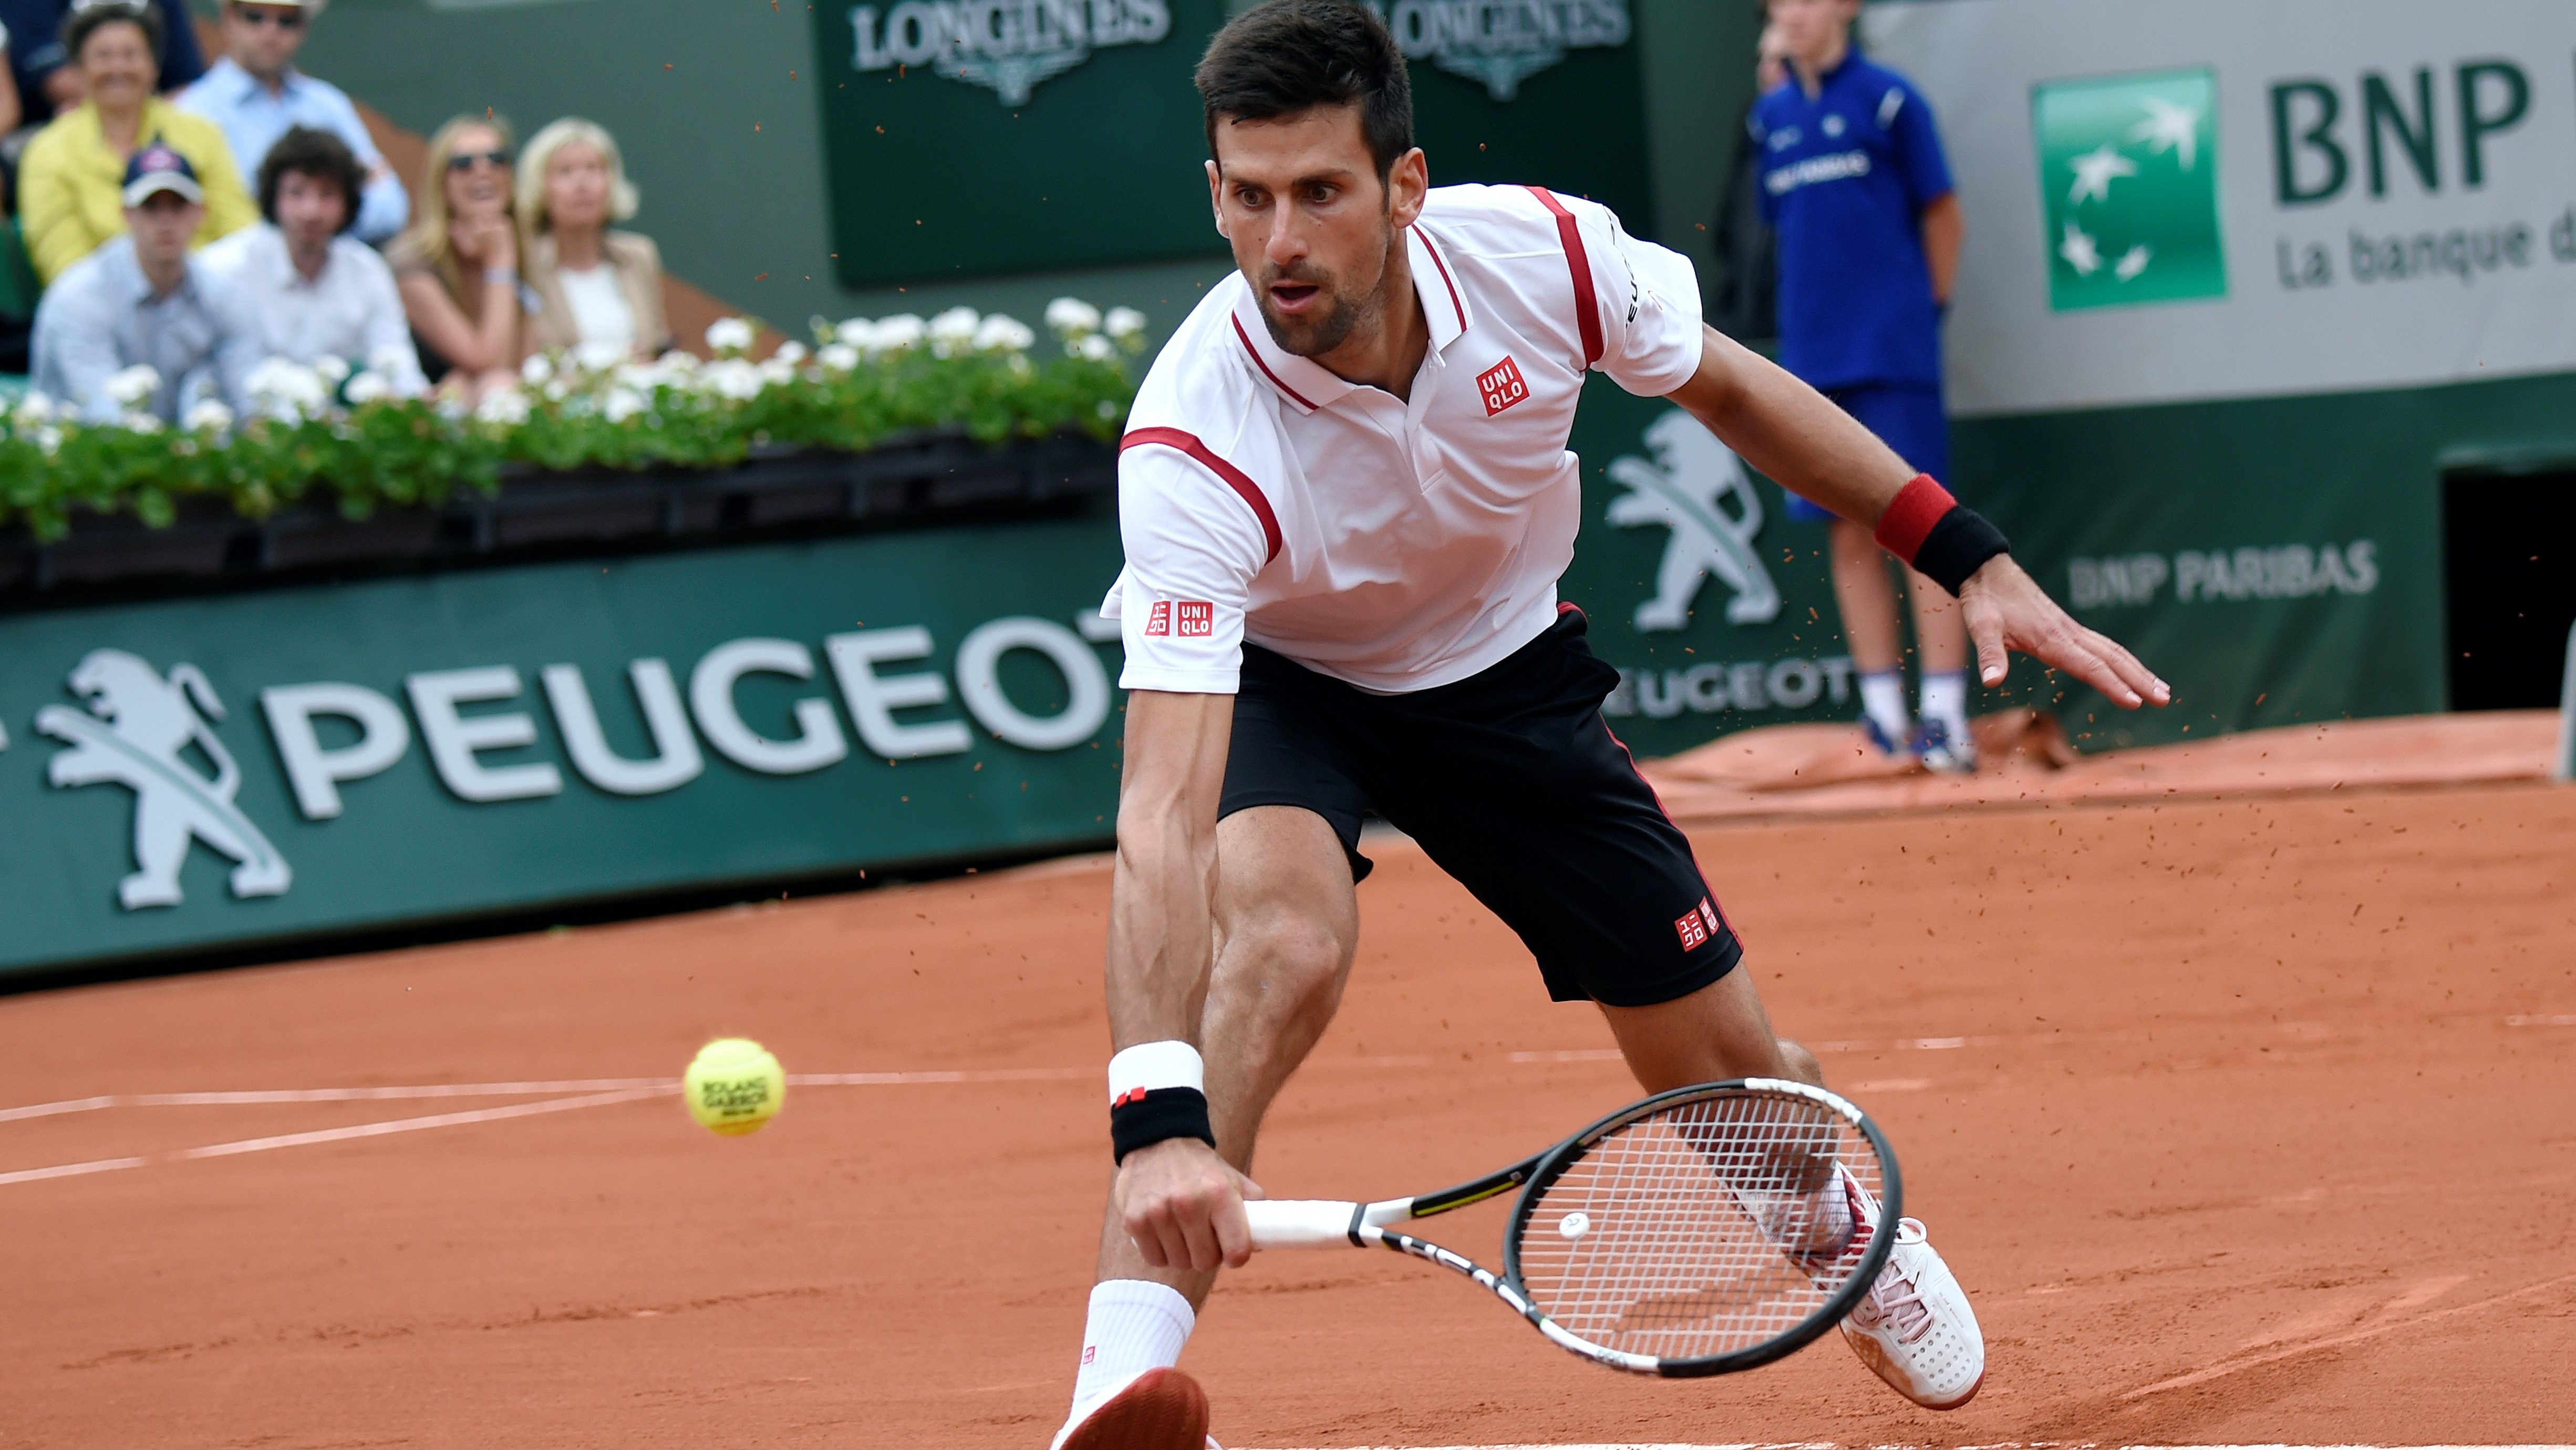 French Open 2016 Live Stream How to Watch Day 7 Online